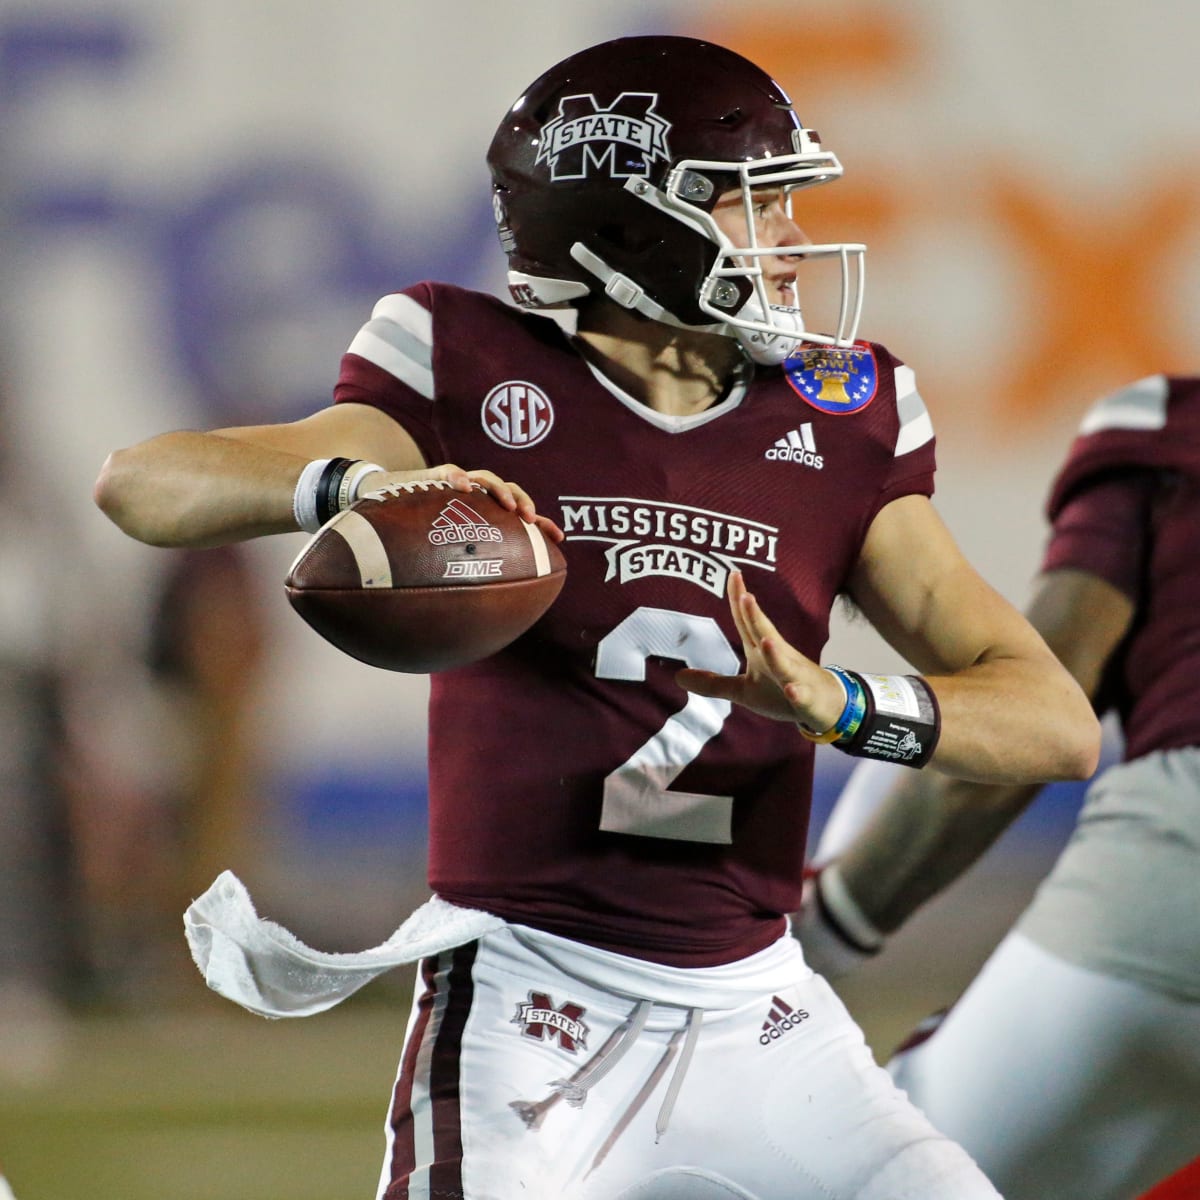 Mississippi State Football Schedule 2022 Mississippi State Football: Bulldogs Announce 2022 Spring Football Schedule  - Sports Illustrated Mississippi State Football, Basketball, Recruiting,  And More